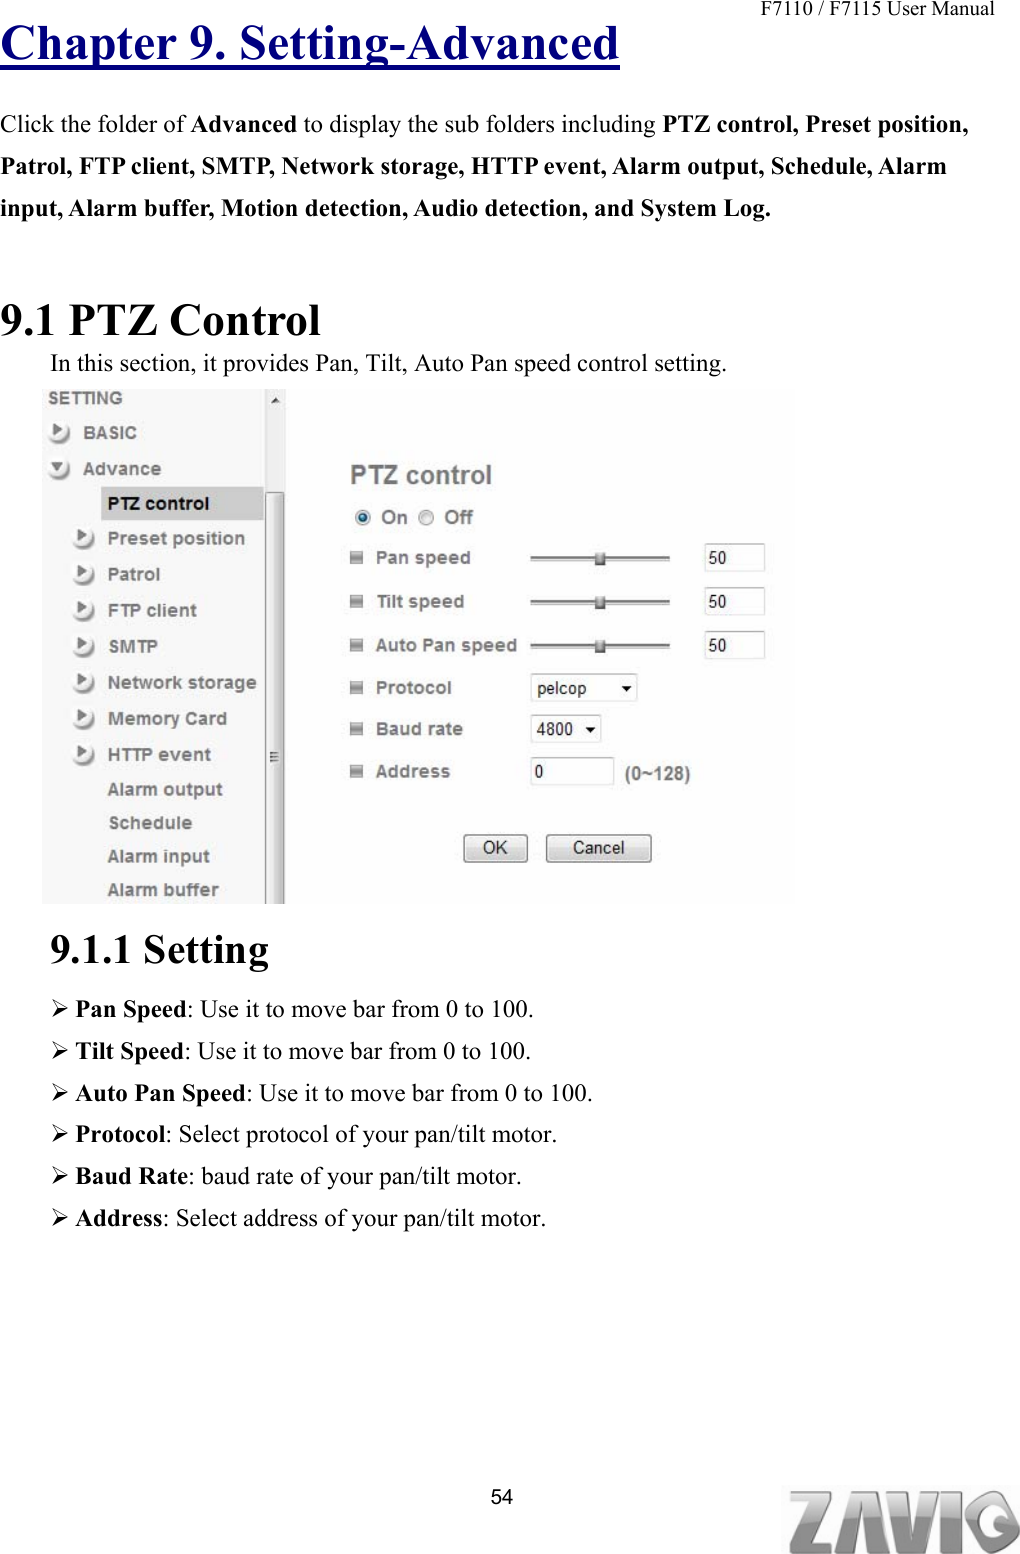 F7110 / F7115 User Manual   Chapter 9. Setting-Advanced Click the folder of Advanced to display the sub folders including PTZ control, Preset position, Patrol, FTP client, SMTP, Network storage, HTTP event, Alarm output, Schedule, Alarm input, Alarm buffer, Motion detection, Audio detection, and System Log.   9.1 PTZ Control In this section, it provides Pan, Tilt, Auto Pan speed control setting.                 9.1.1 Setting  Pan Speed: Use it to move bar from 0 to 100.  Tilt Speed: Use it to move bar from 0 to 100.  Auto Pan Speed: Use it to move bar from 0 to 100.  Protocol: Select protocol of your pan/tilt motor.  Baud Rate: baud rate of your pan/tilt motor.  Address: Select address of your pan/tilt motor.  54Setting-Advanced PT Control